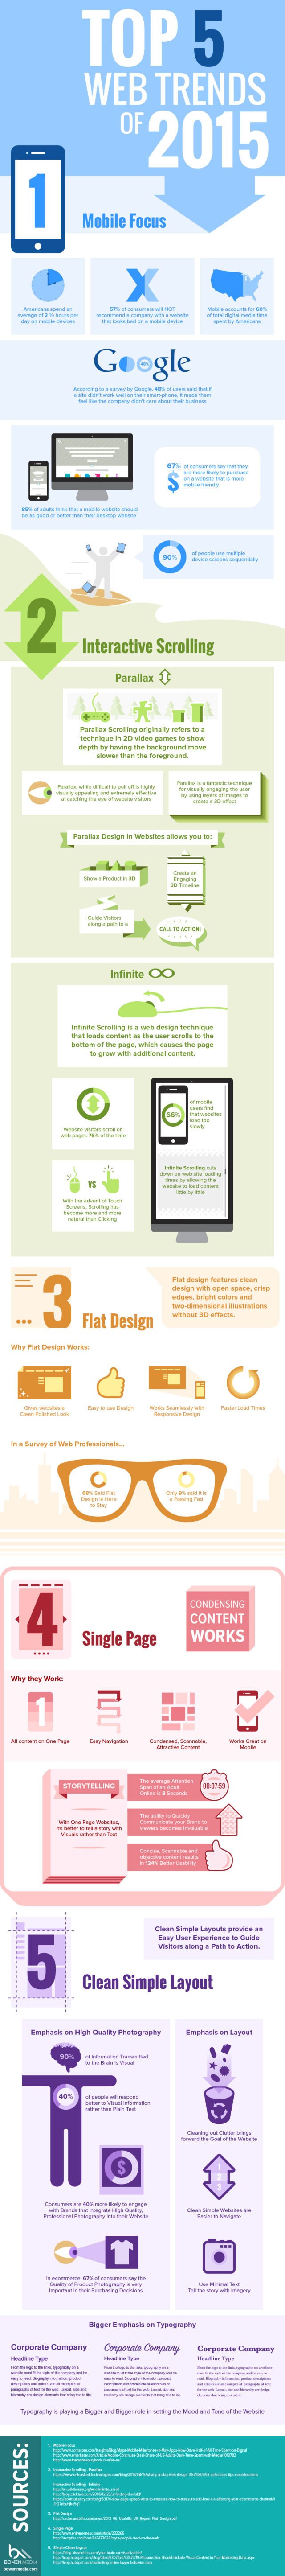 top web trends of 2015 infographic